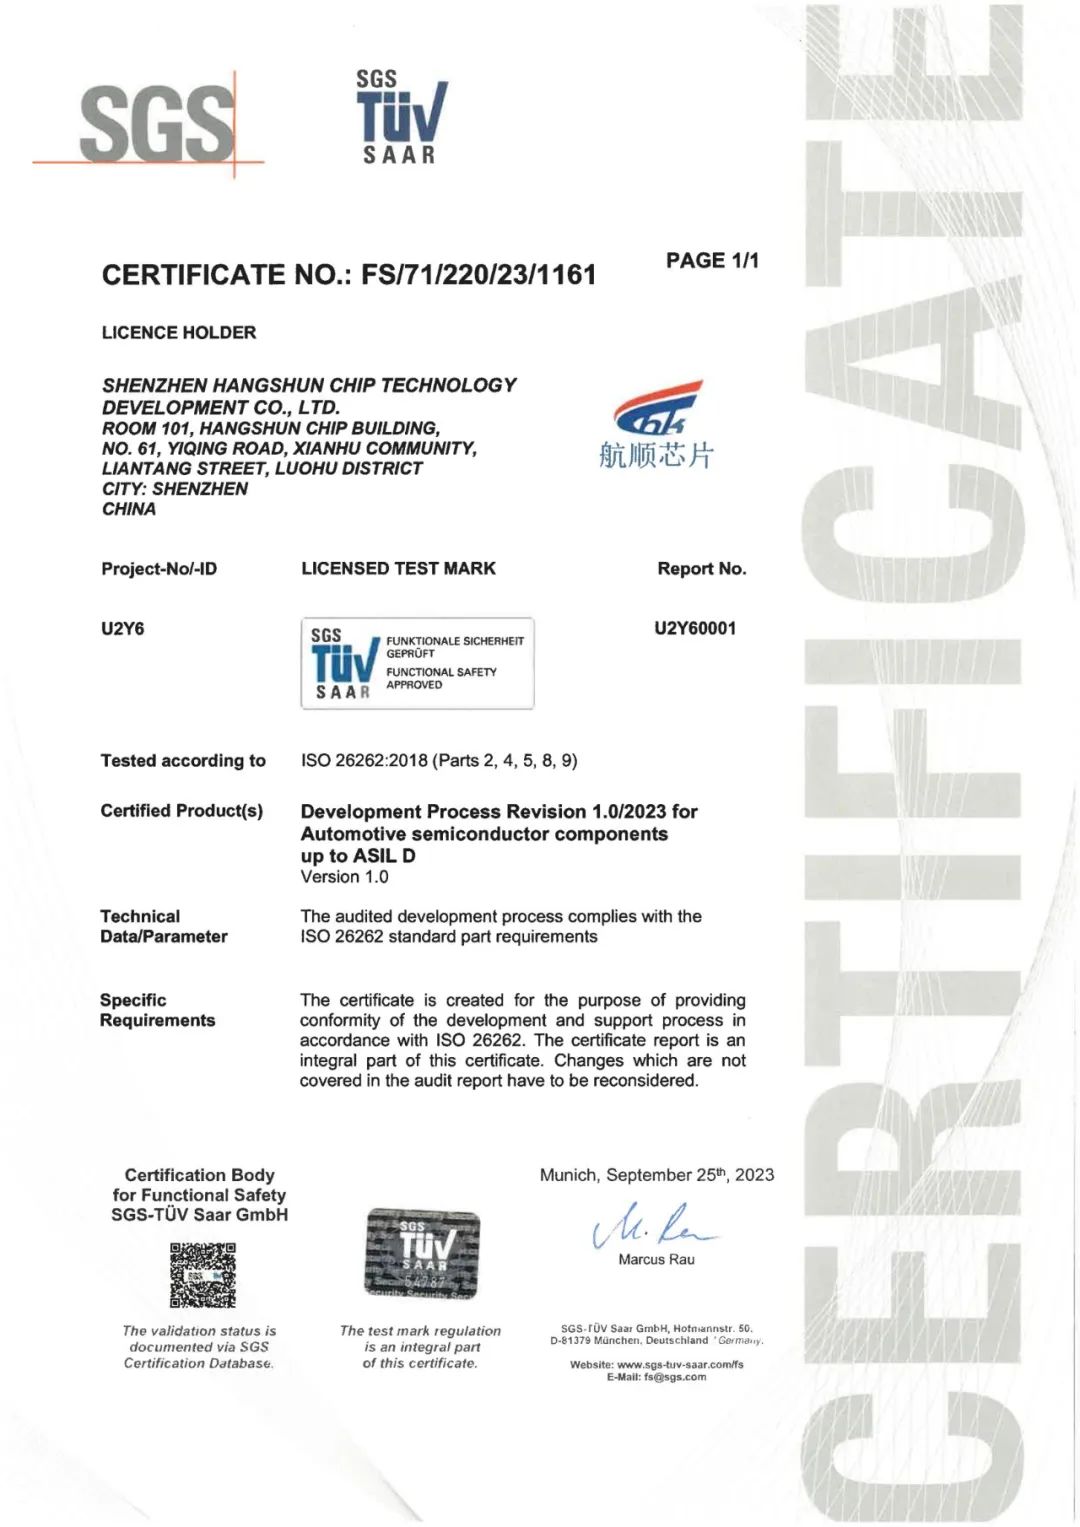 Hangshun chip has obtained the highest ASIL D certification in ISO 26262, and the automotive functional safety management system has been further upgraded